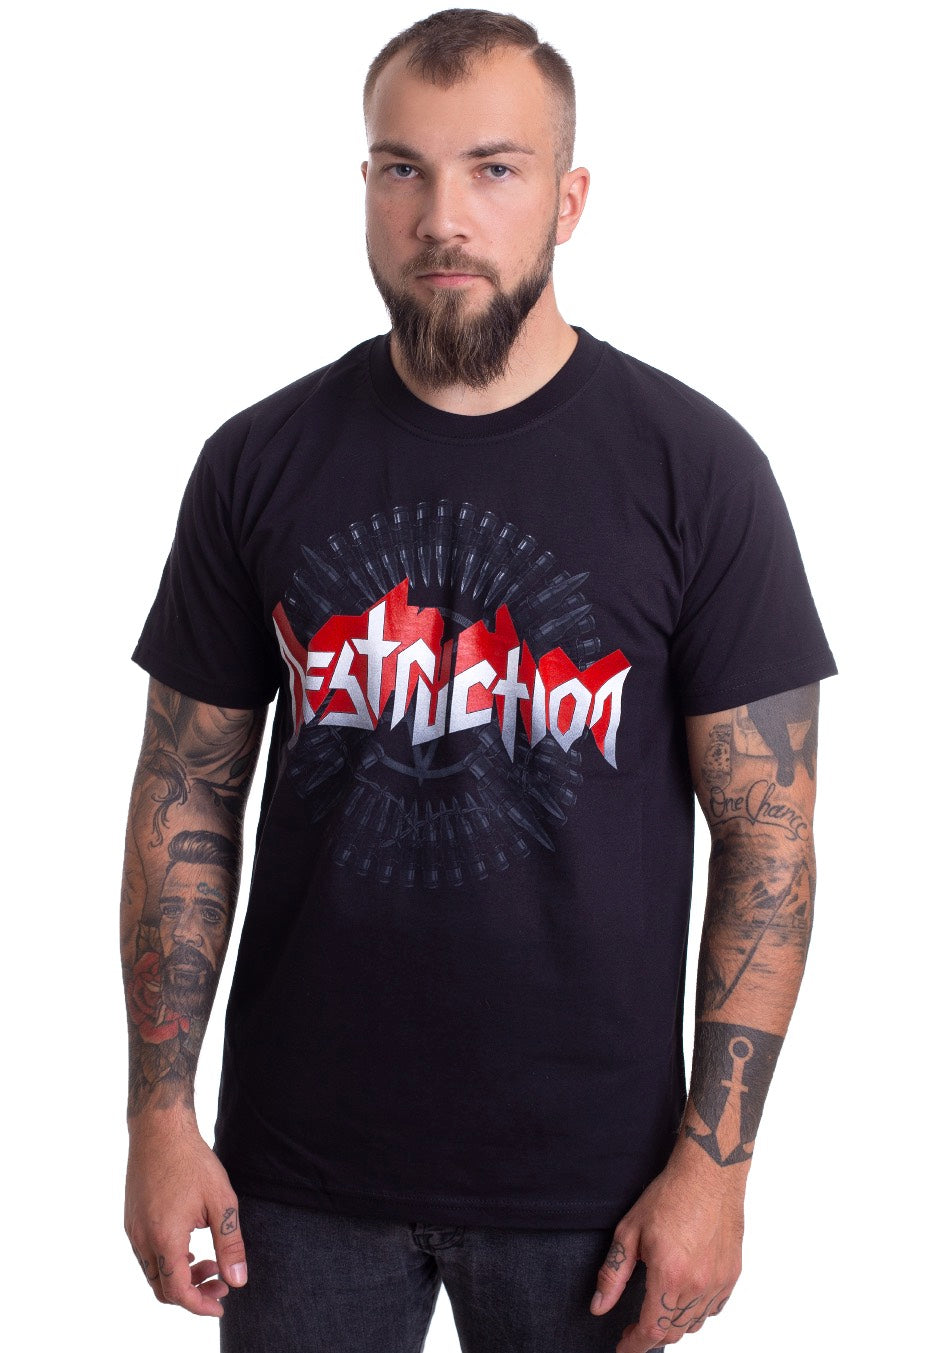 Destruction - Inspired By Death - T-Shirt